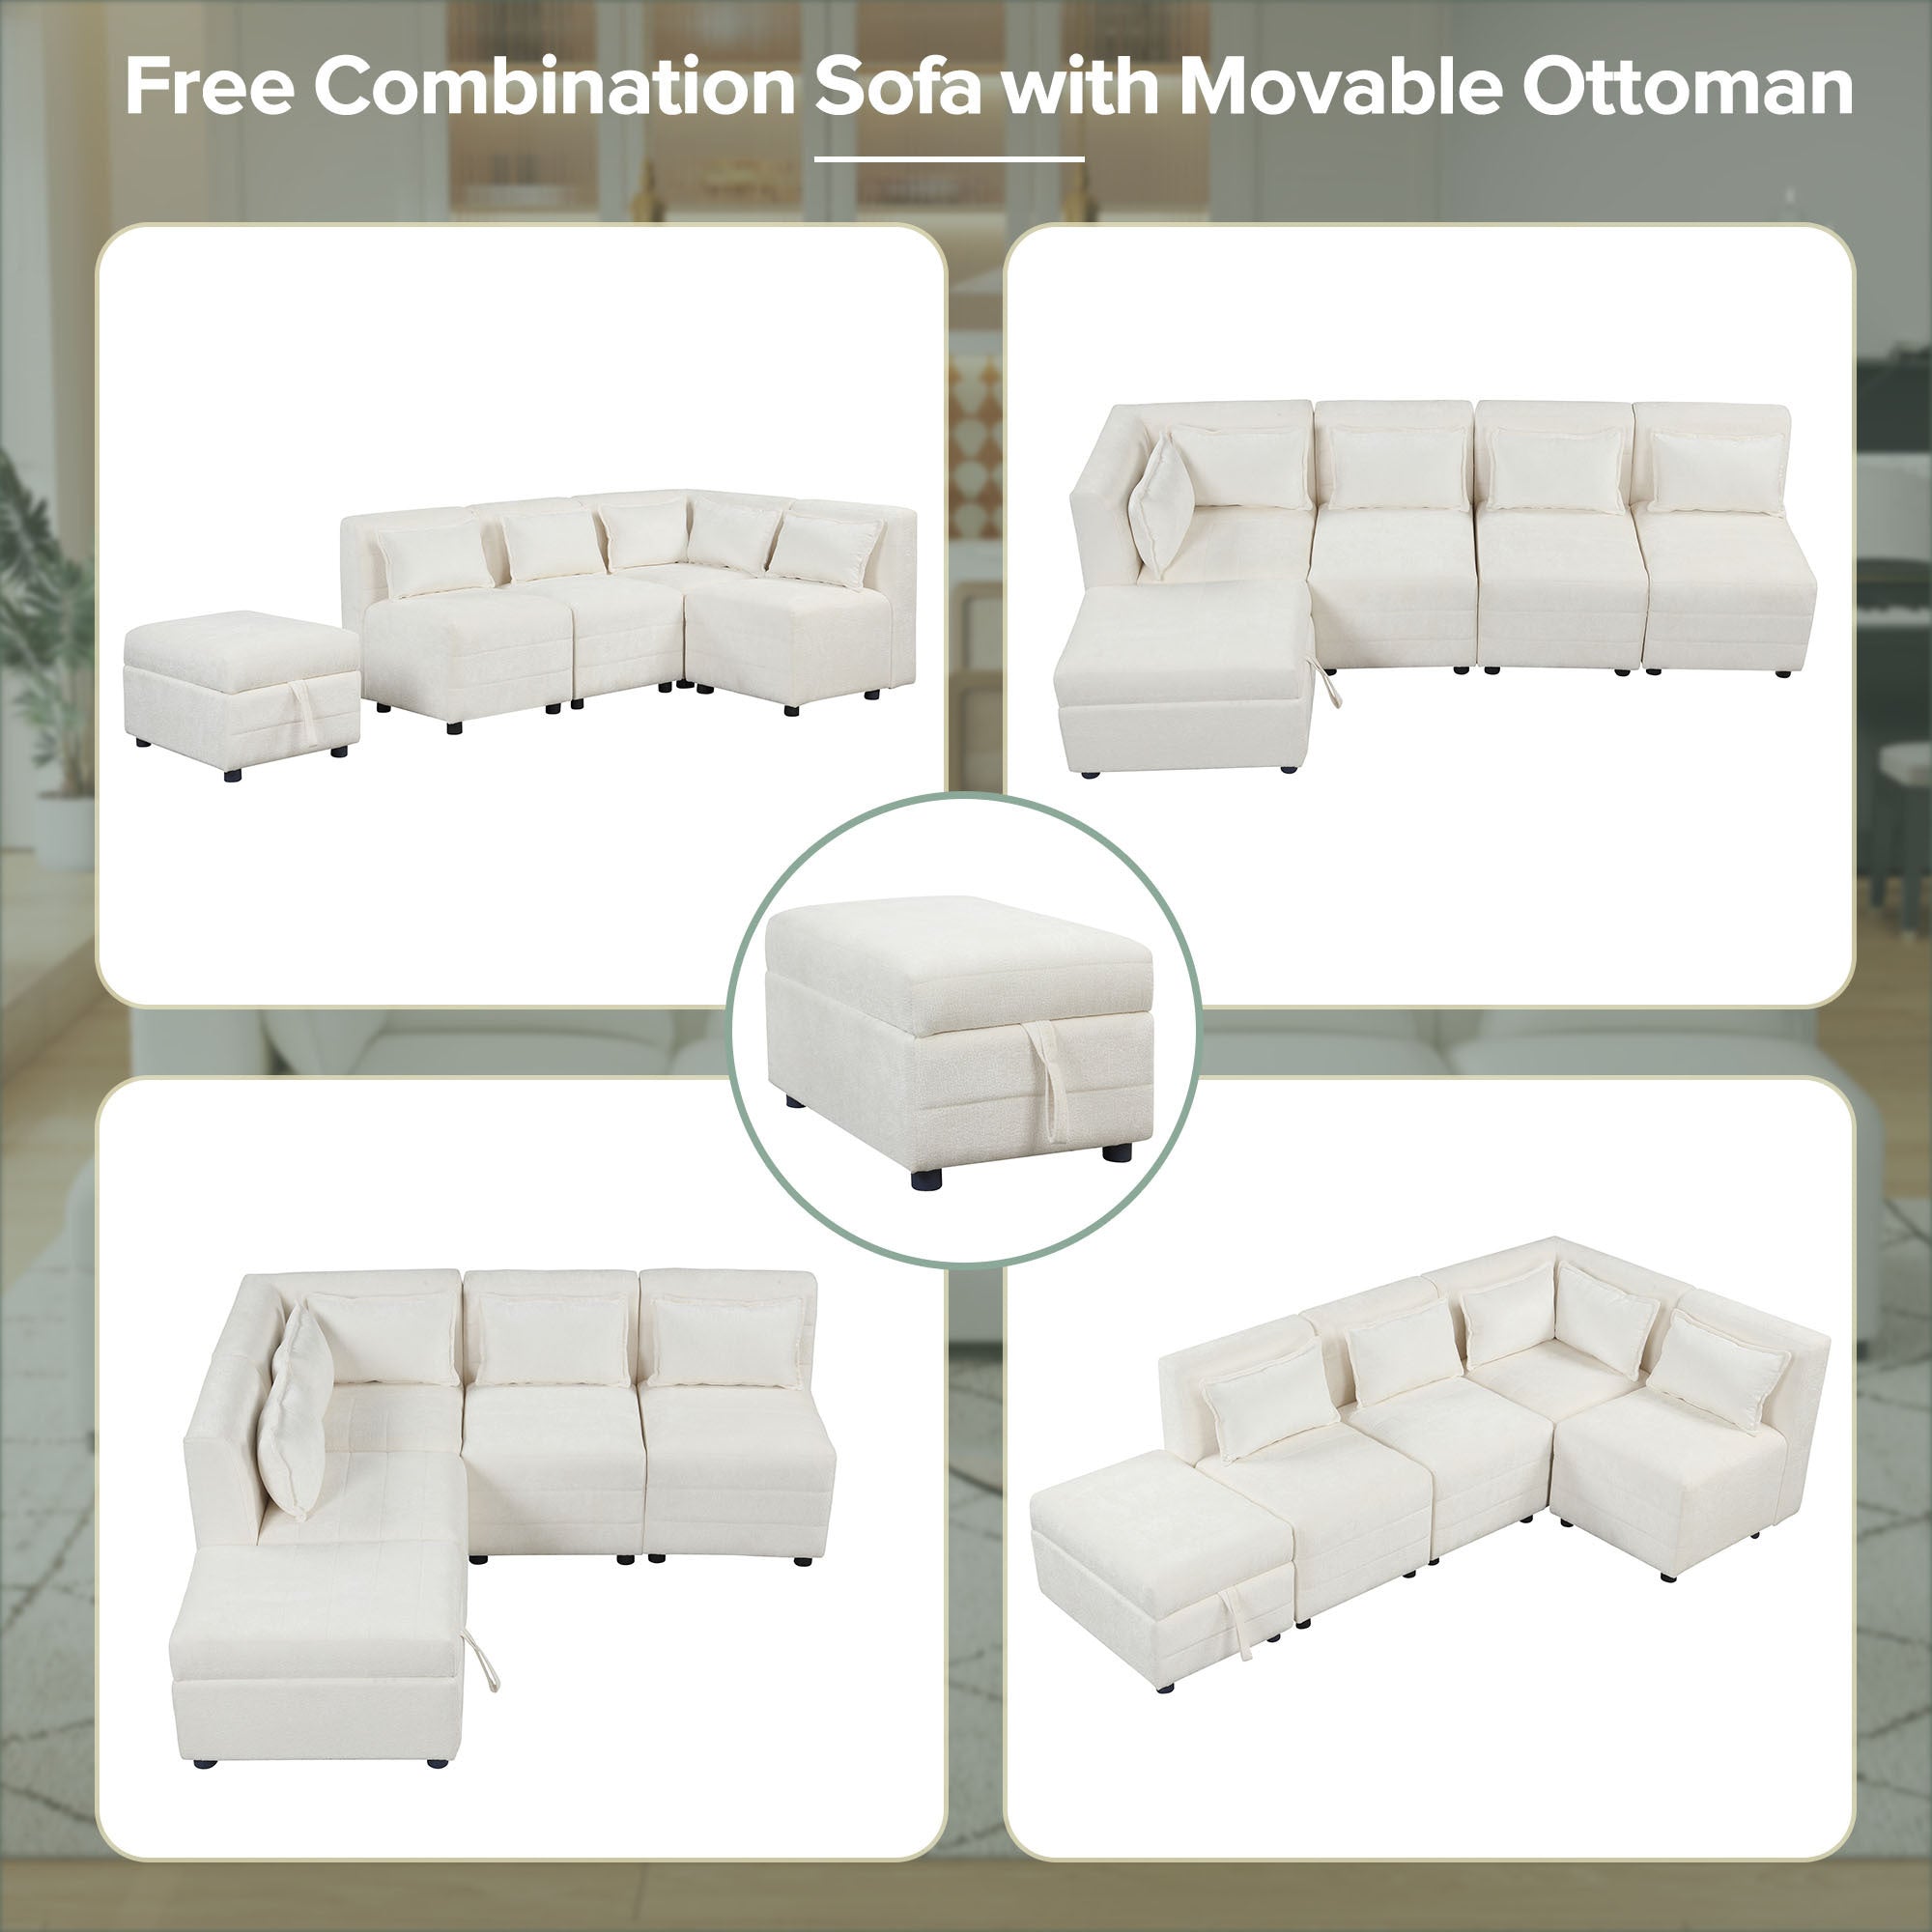 Free-Combined Sectional Sofa 5-seater Modular Couches with Storage - e47d6640a2c745fda76fed49620f6bfe